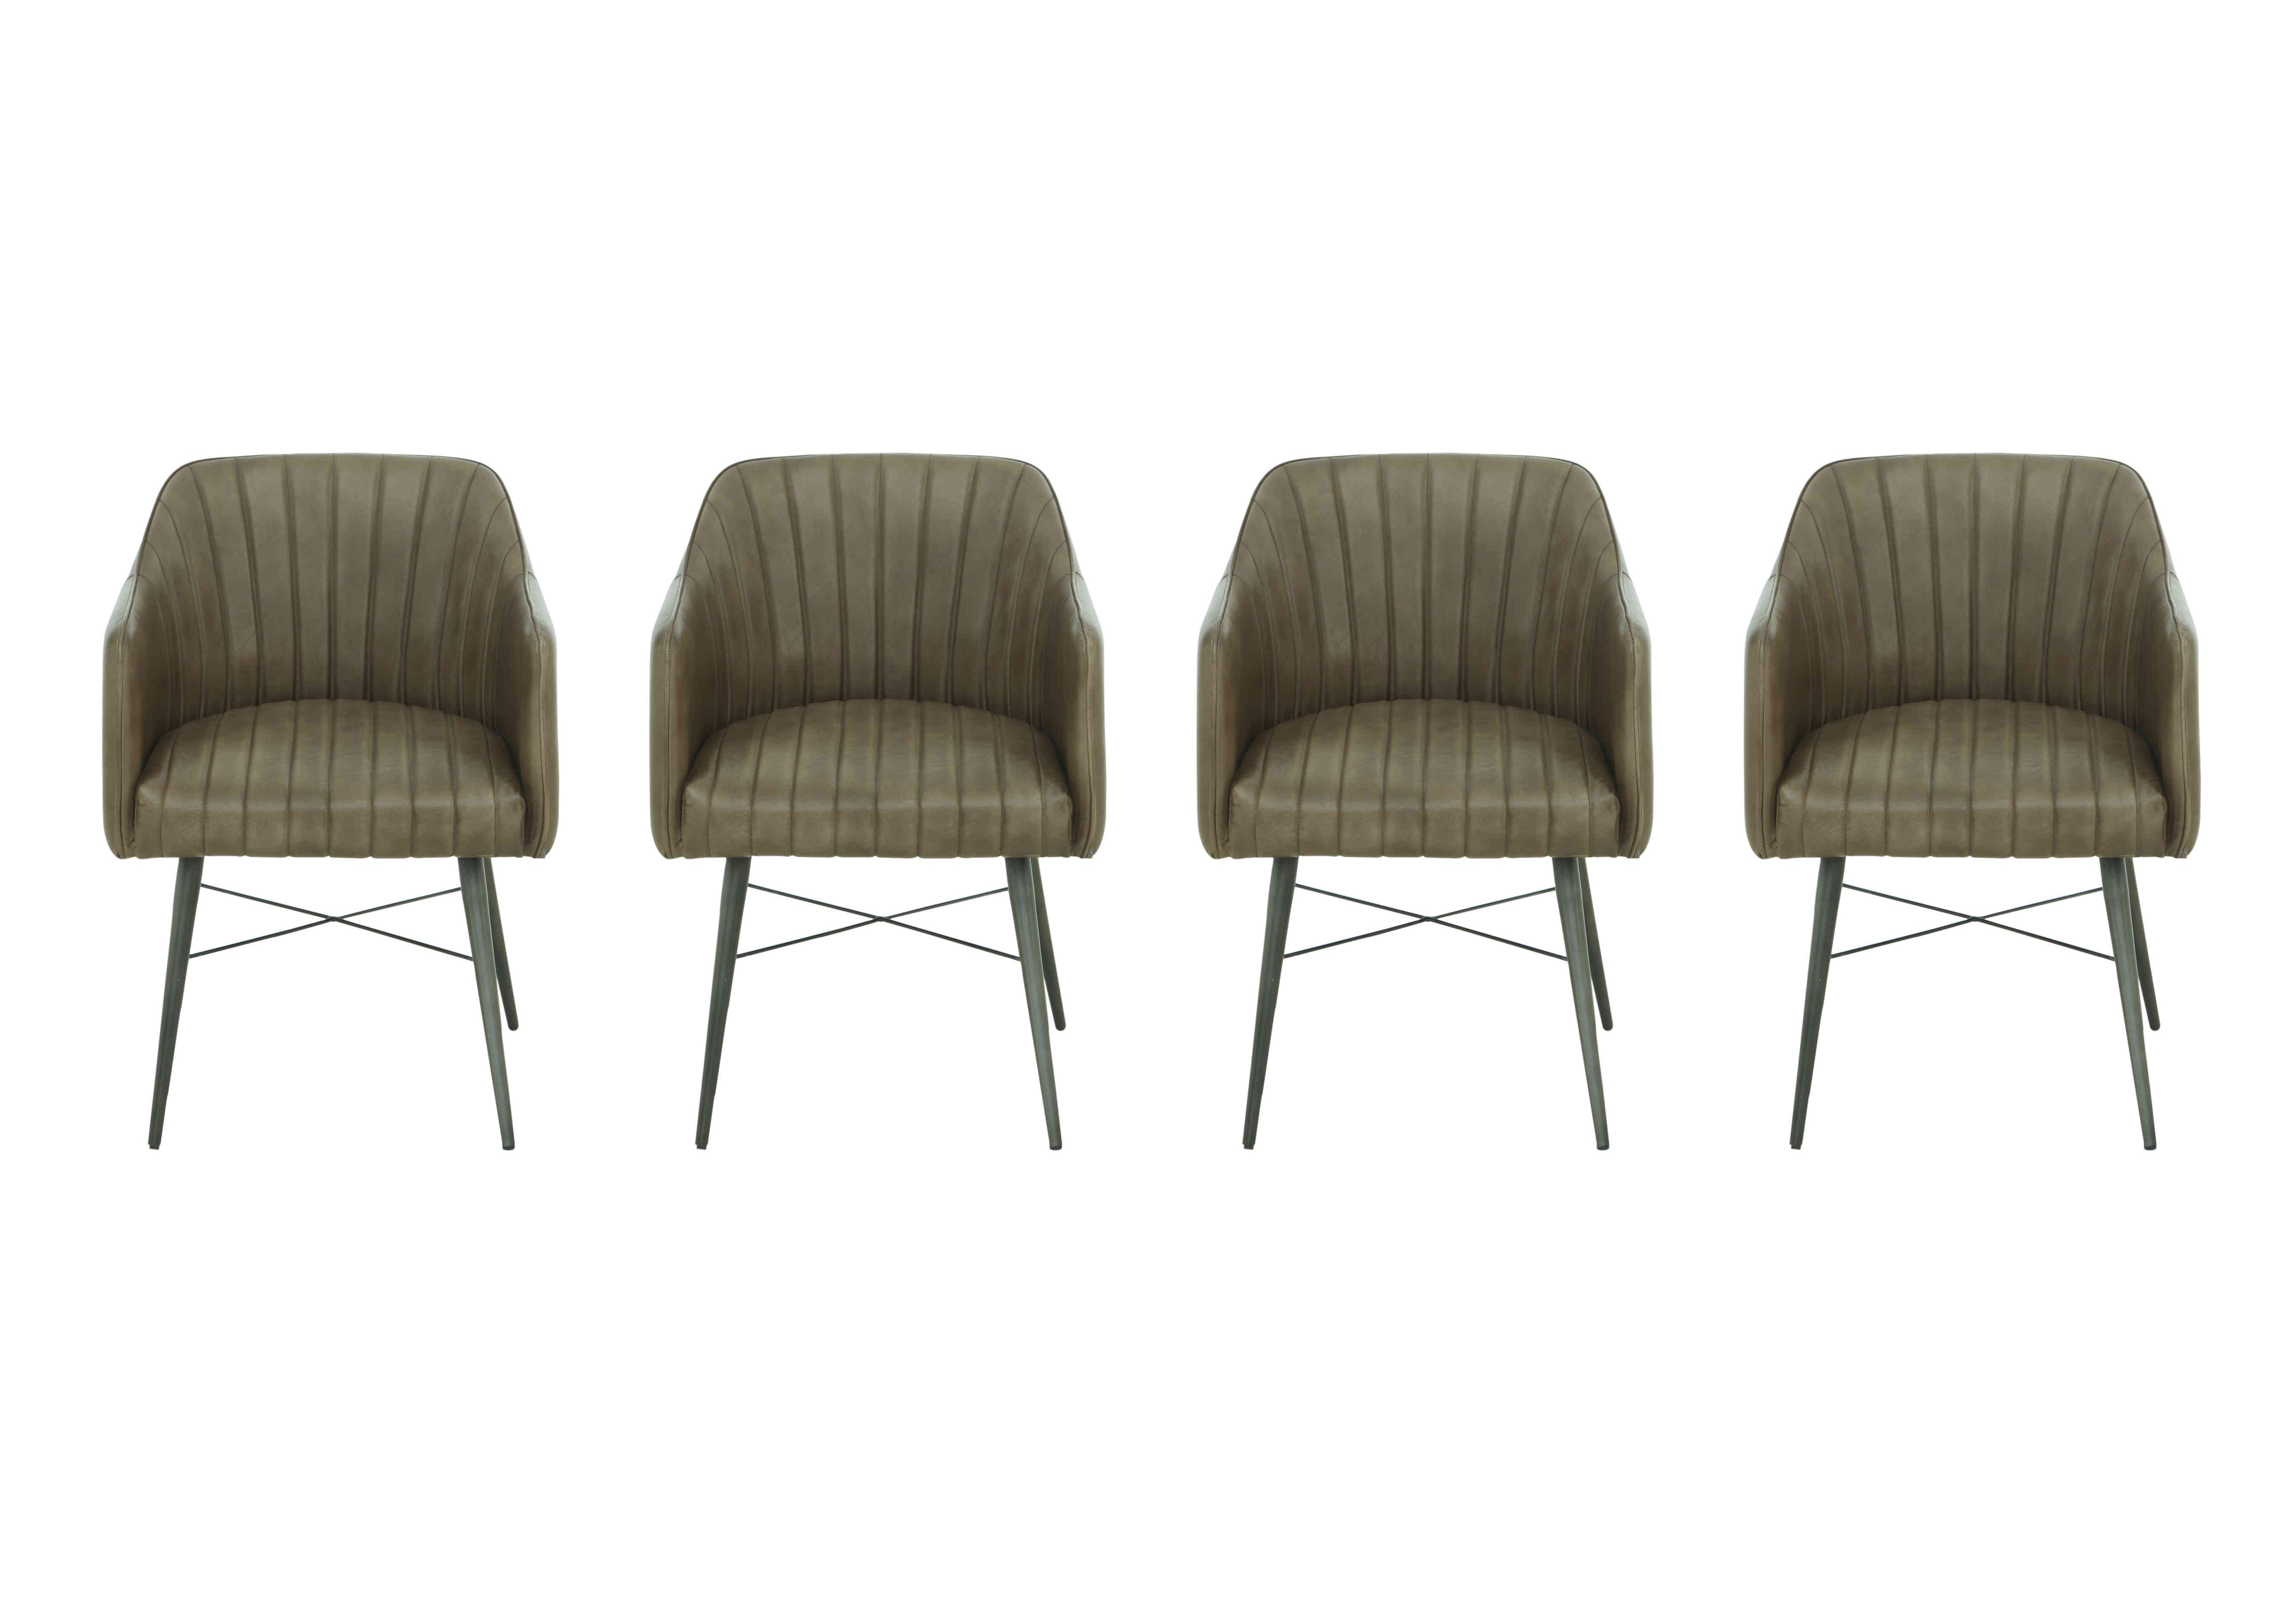 Max Set of 4 Leather Dining Chairs in Olive on Furniture Village